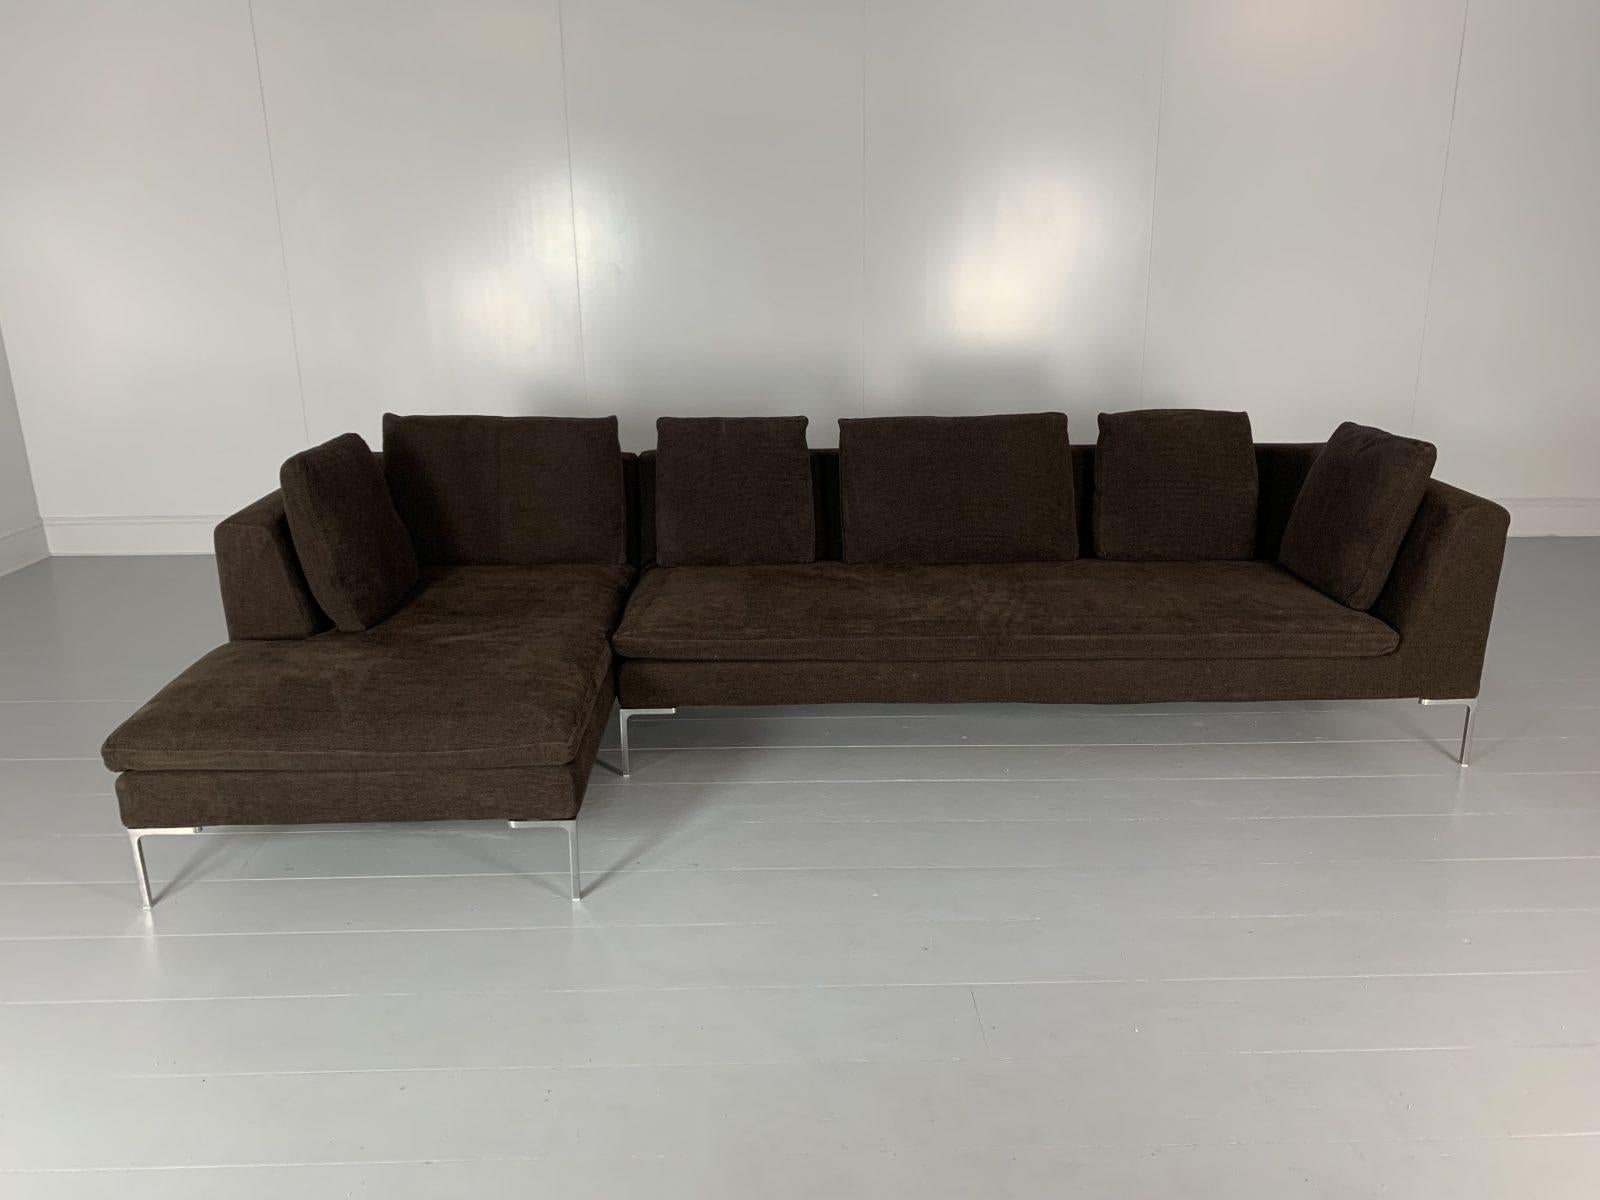 Hello Friends, and welcome to another unmissable offering from Lord Browns Furniture, the UK’s premier resource for fine Sofas and Chairs.

On offer on this occasion is an iconic “Charles” 2-Section L-Shape 5-Seat Sofa (consisting of a CH228D, and